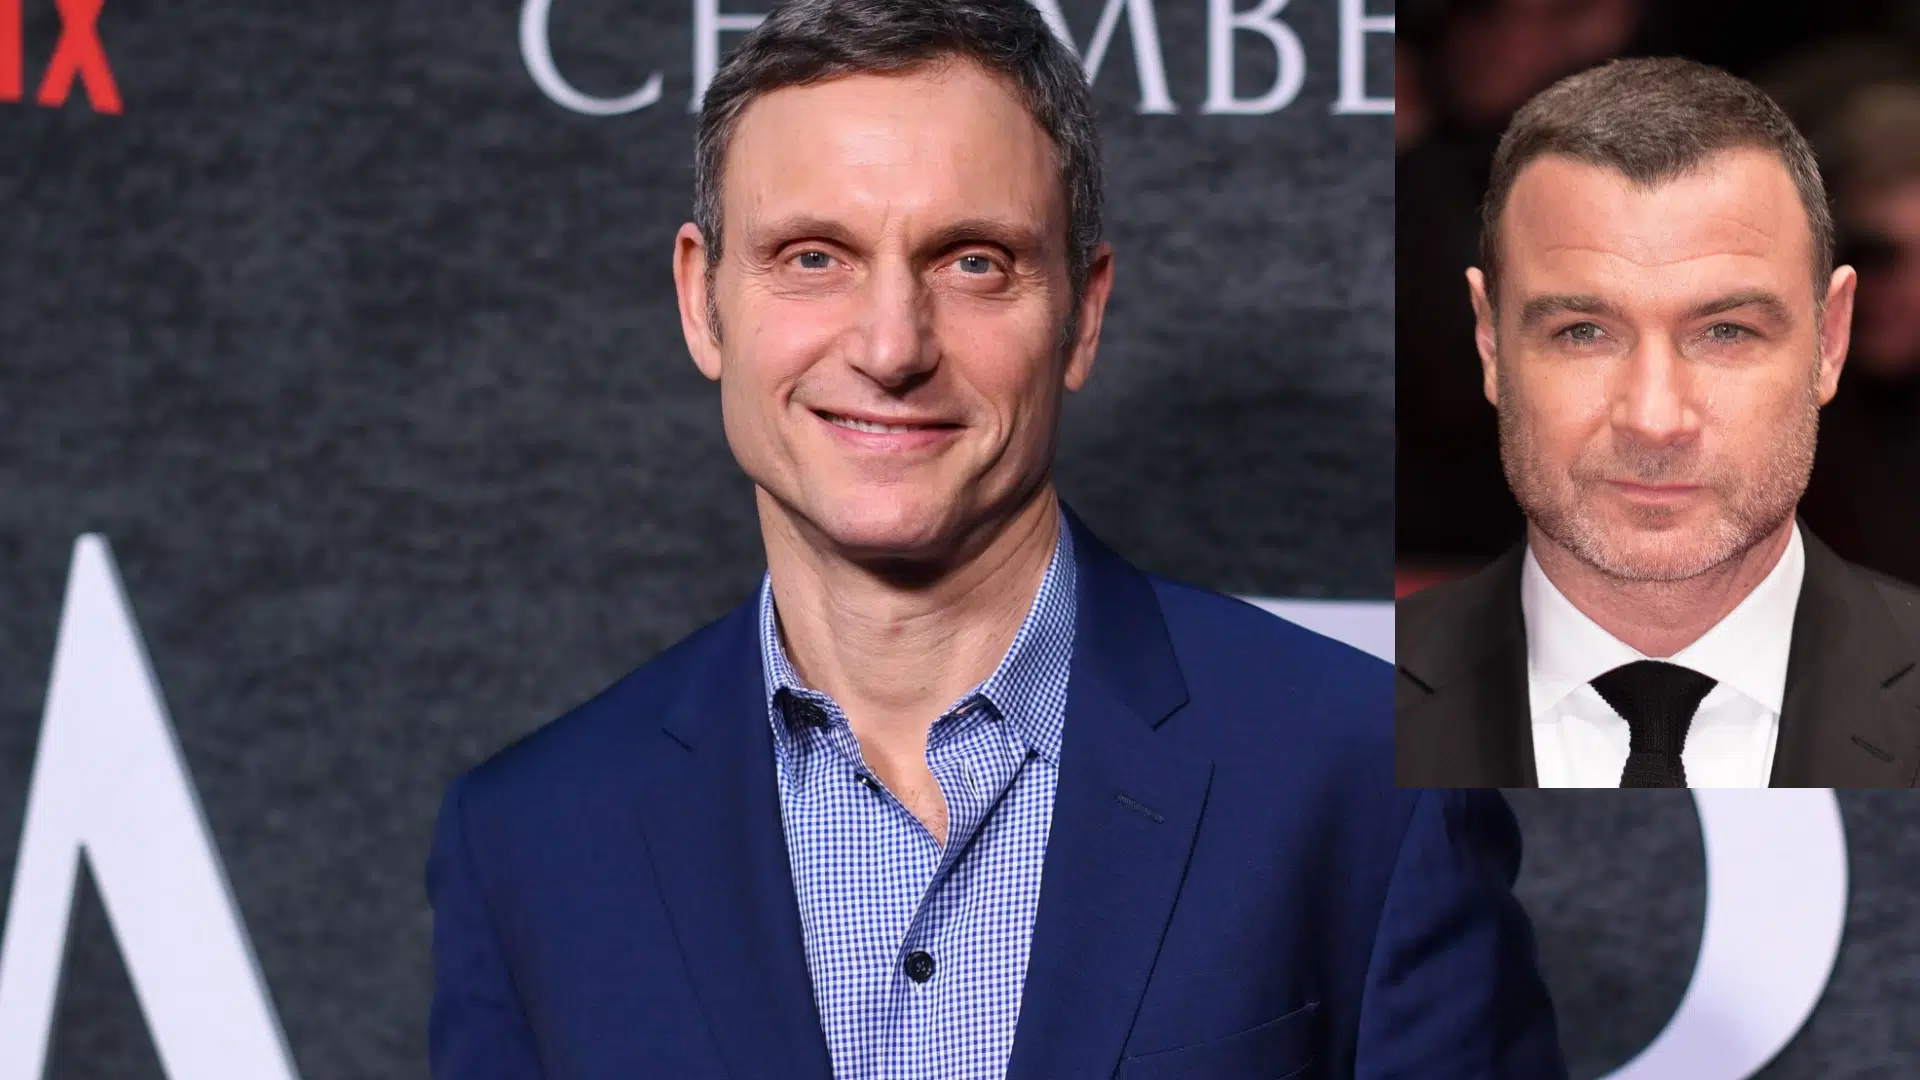 Tony Goldwyn replaced Liev Schreiber for the role: Paul Cohen